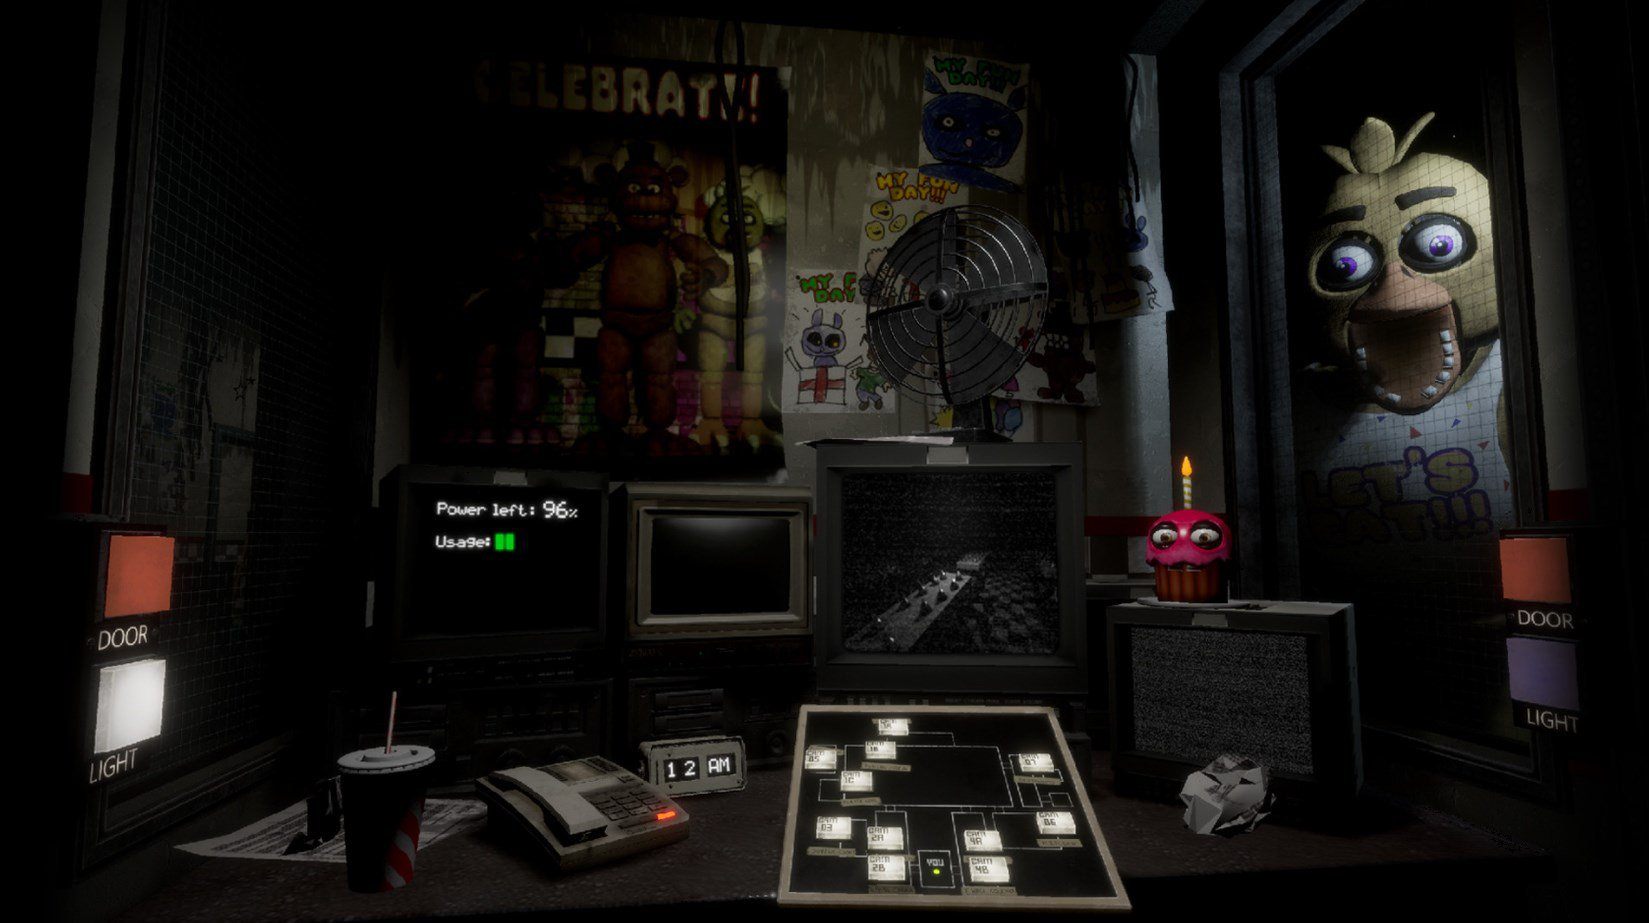 Five Nights At Freddy's - Discover This Crazy Game